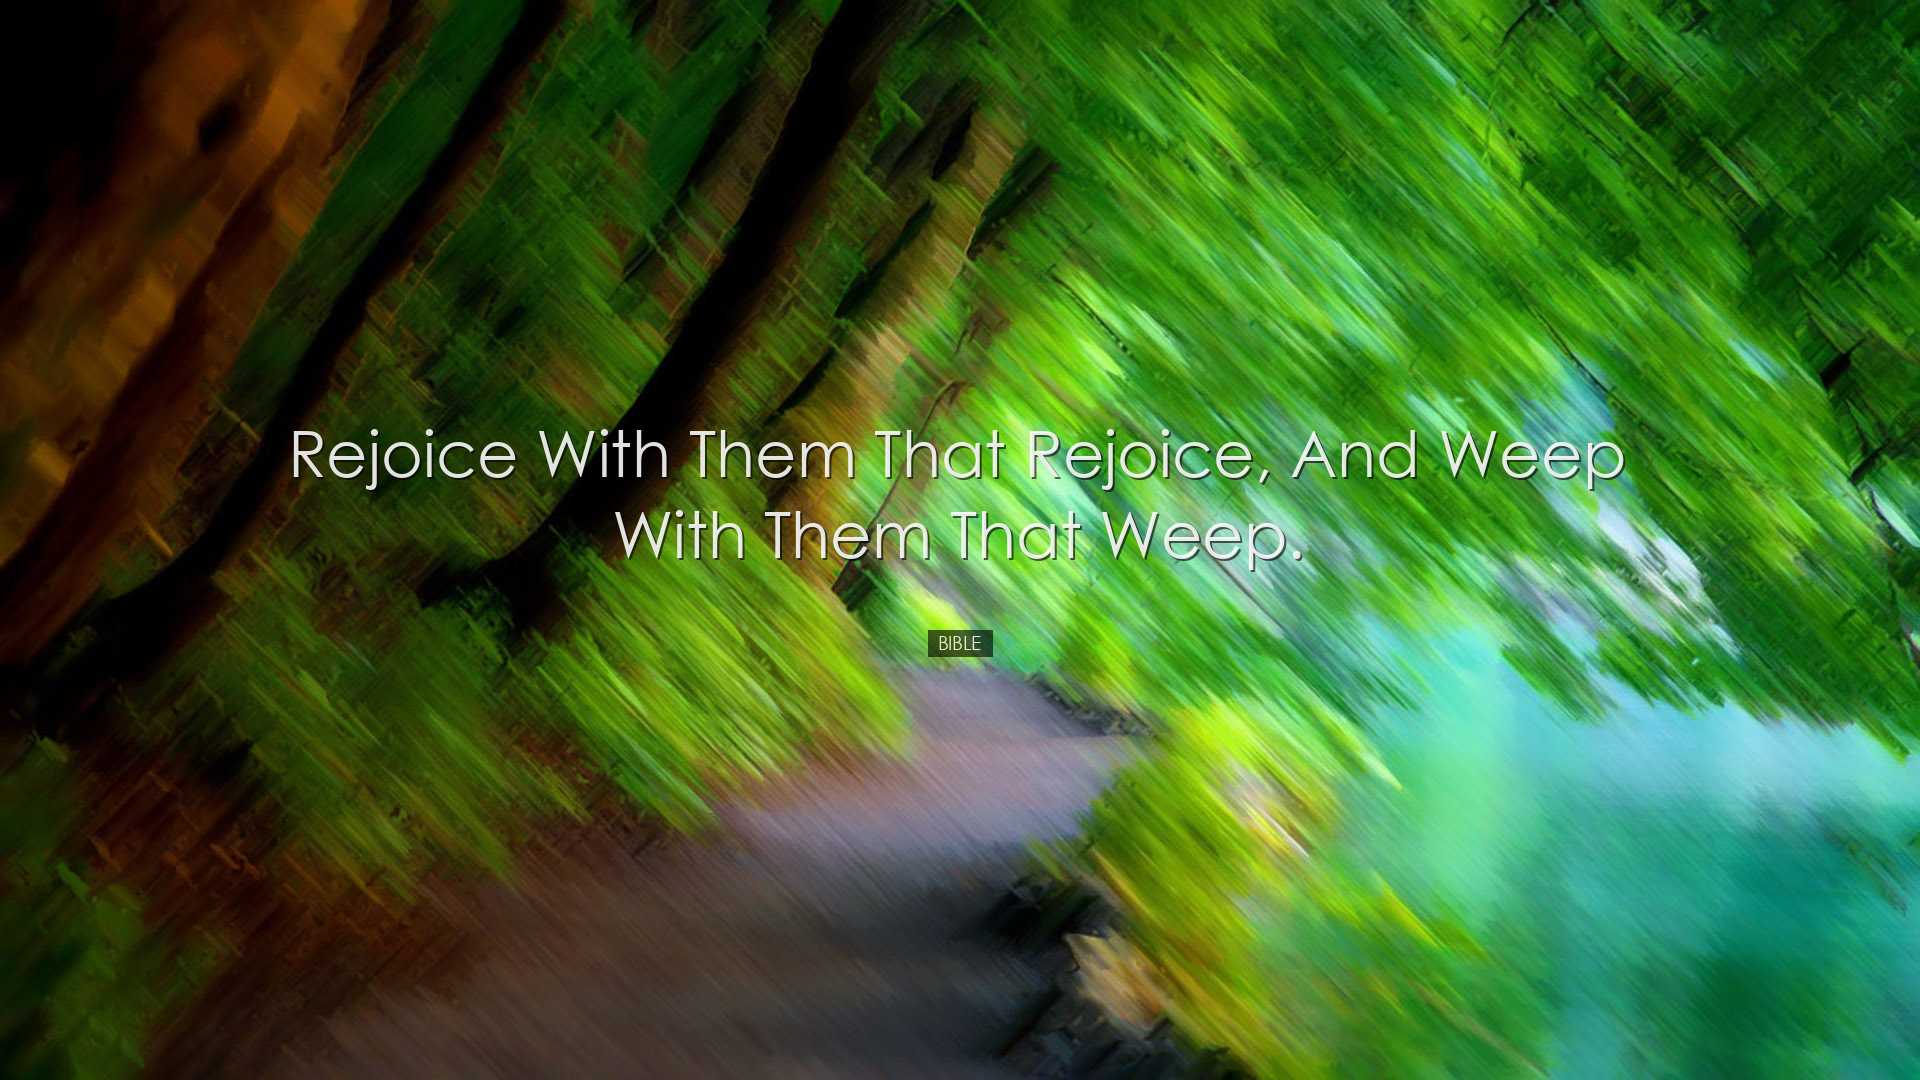 Rejoice with them that rejoice, and weep with them that weep. - Bi